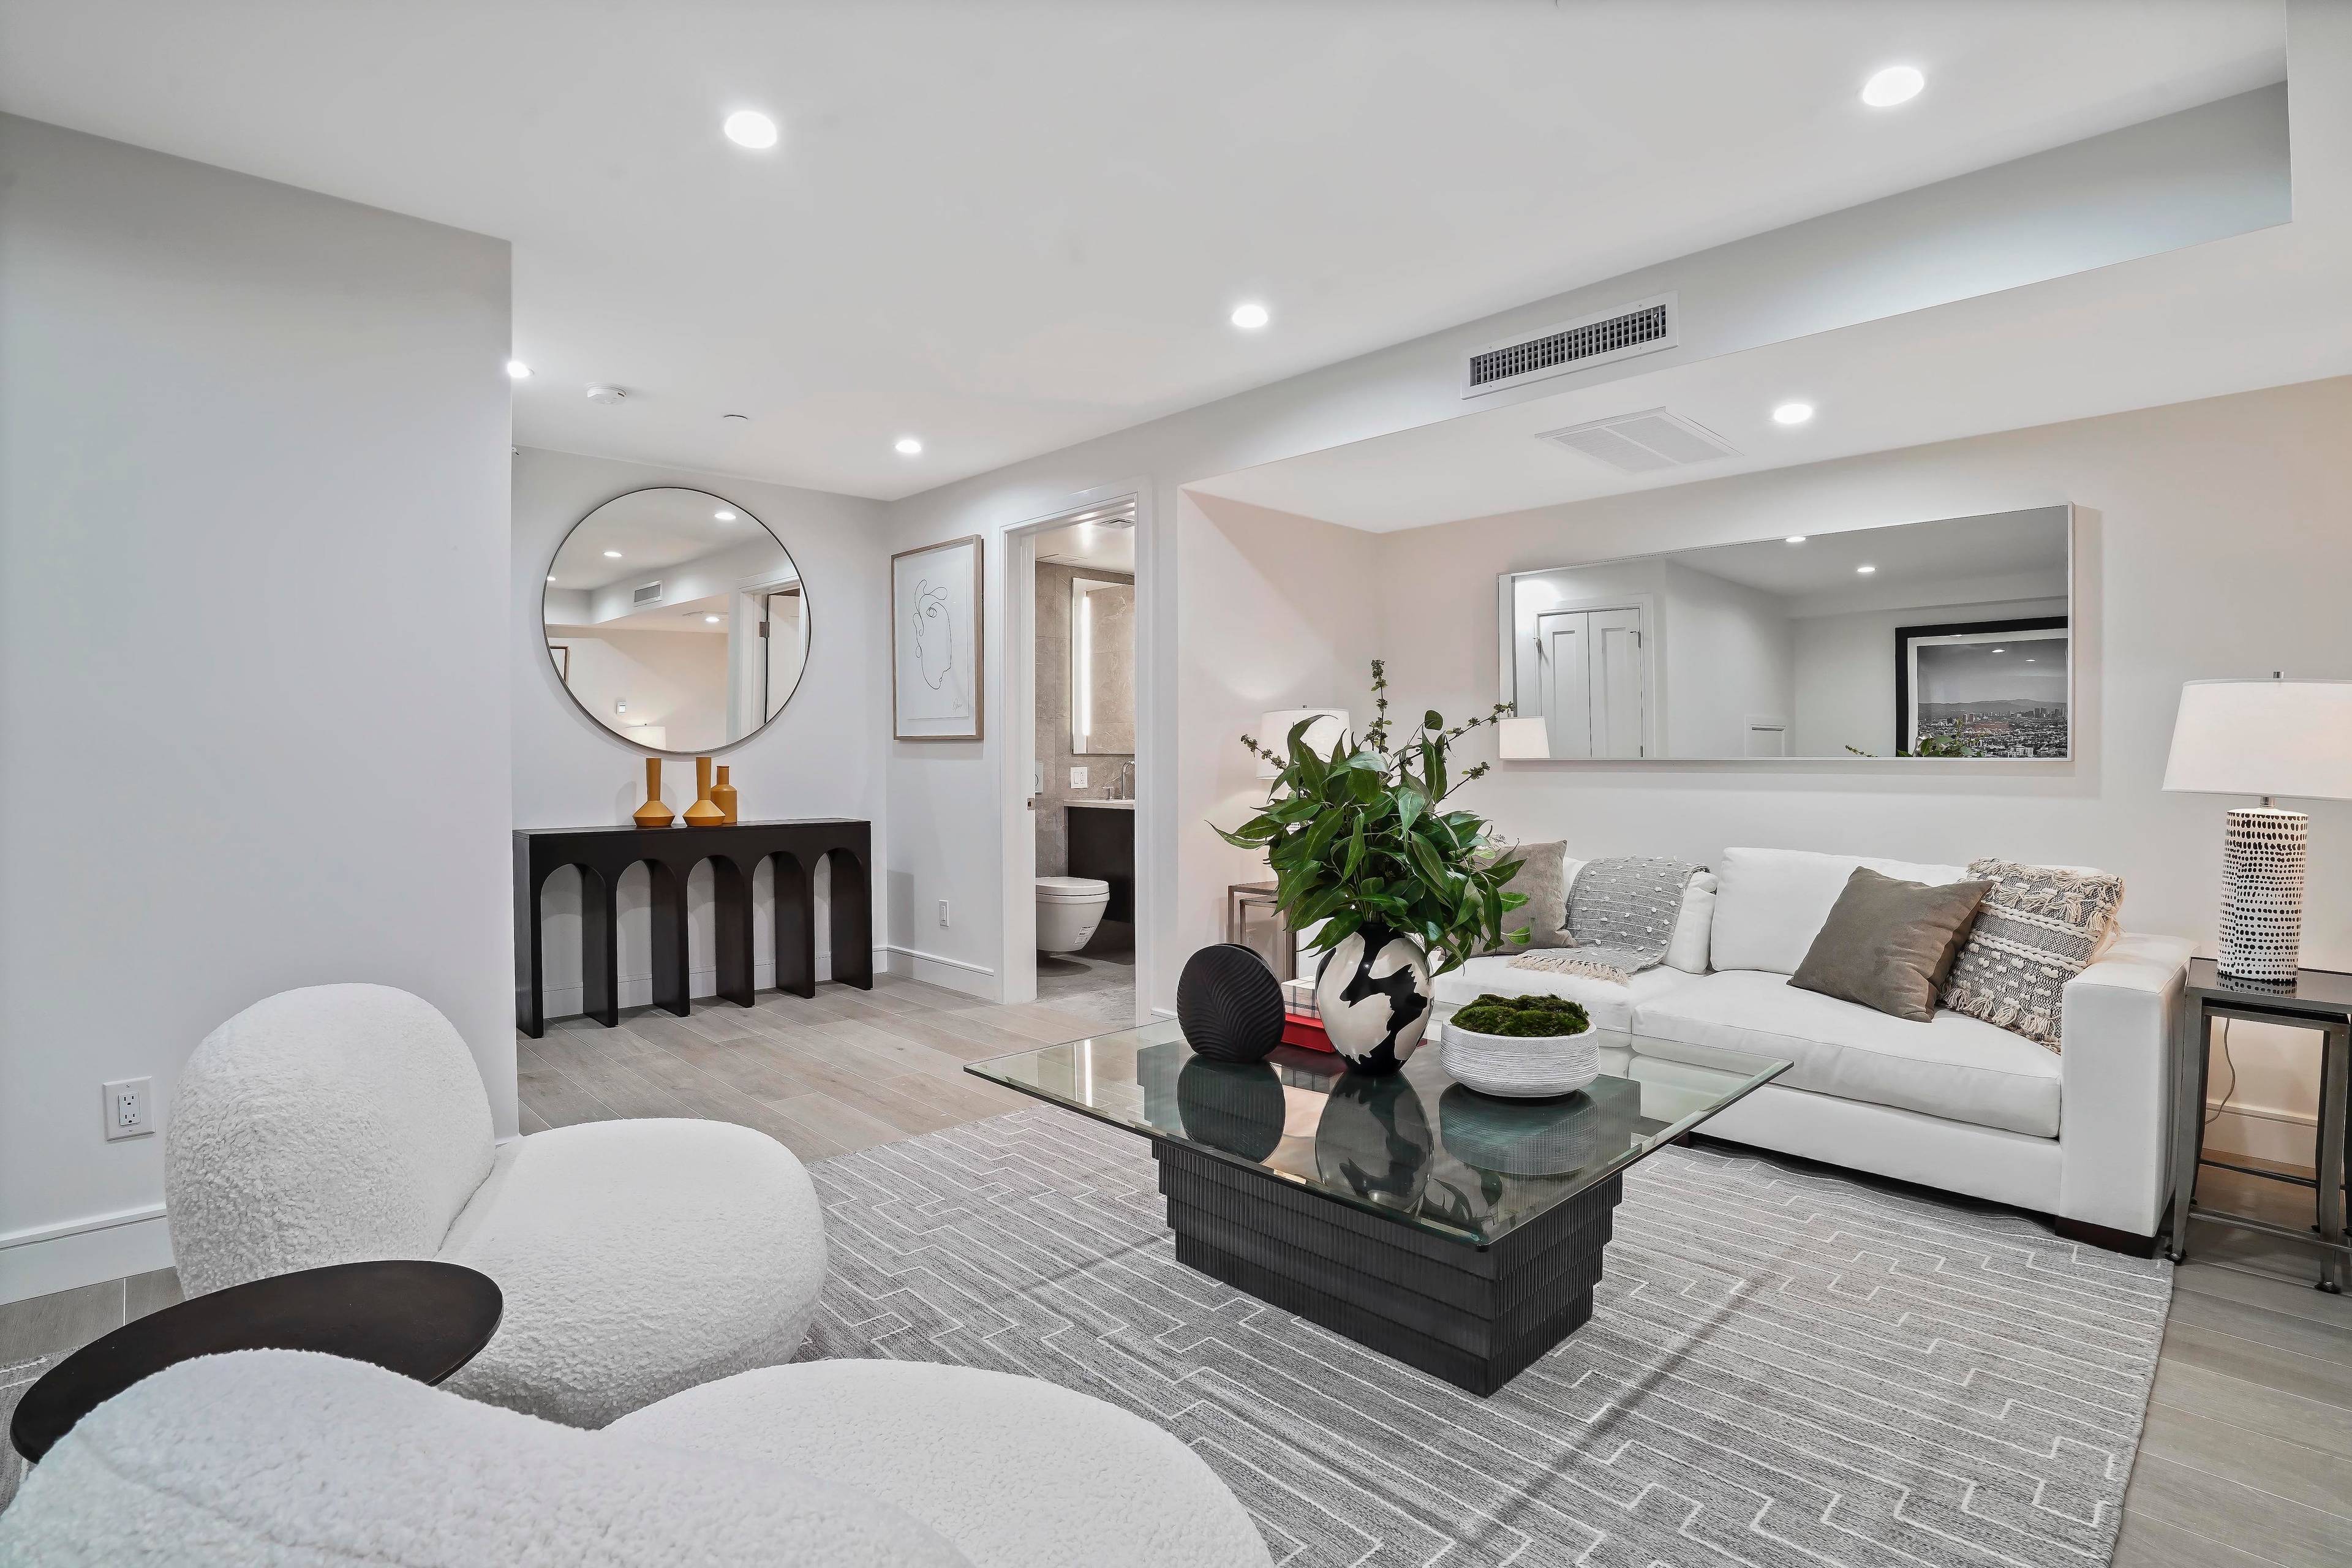 This modern, boutique 8 unit new development is located at 45 Garnet Street in Carroll Gardens is the epitome of elegant simplicity and privacy.